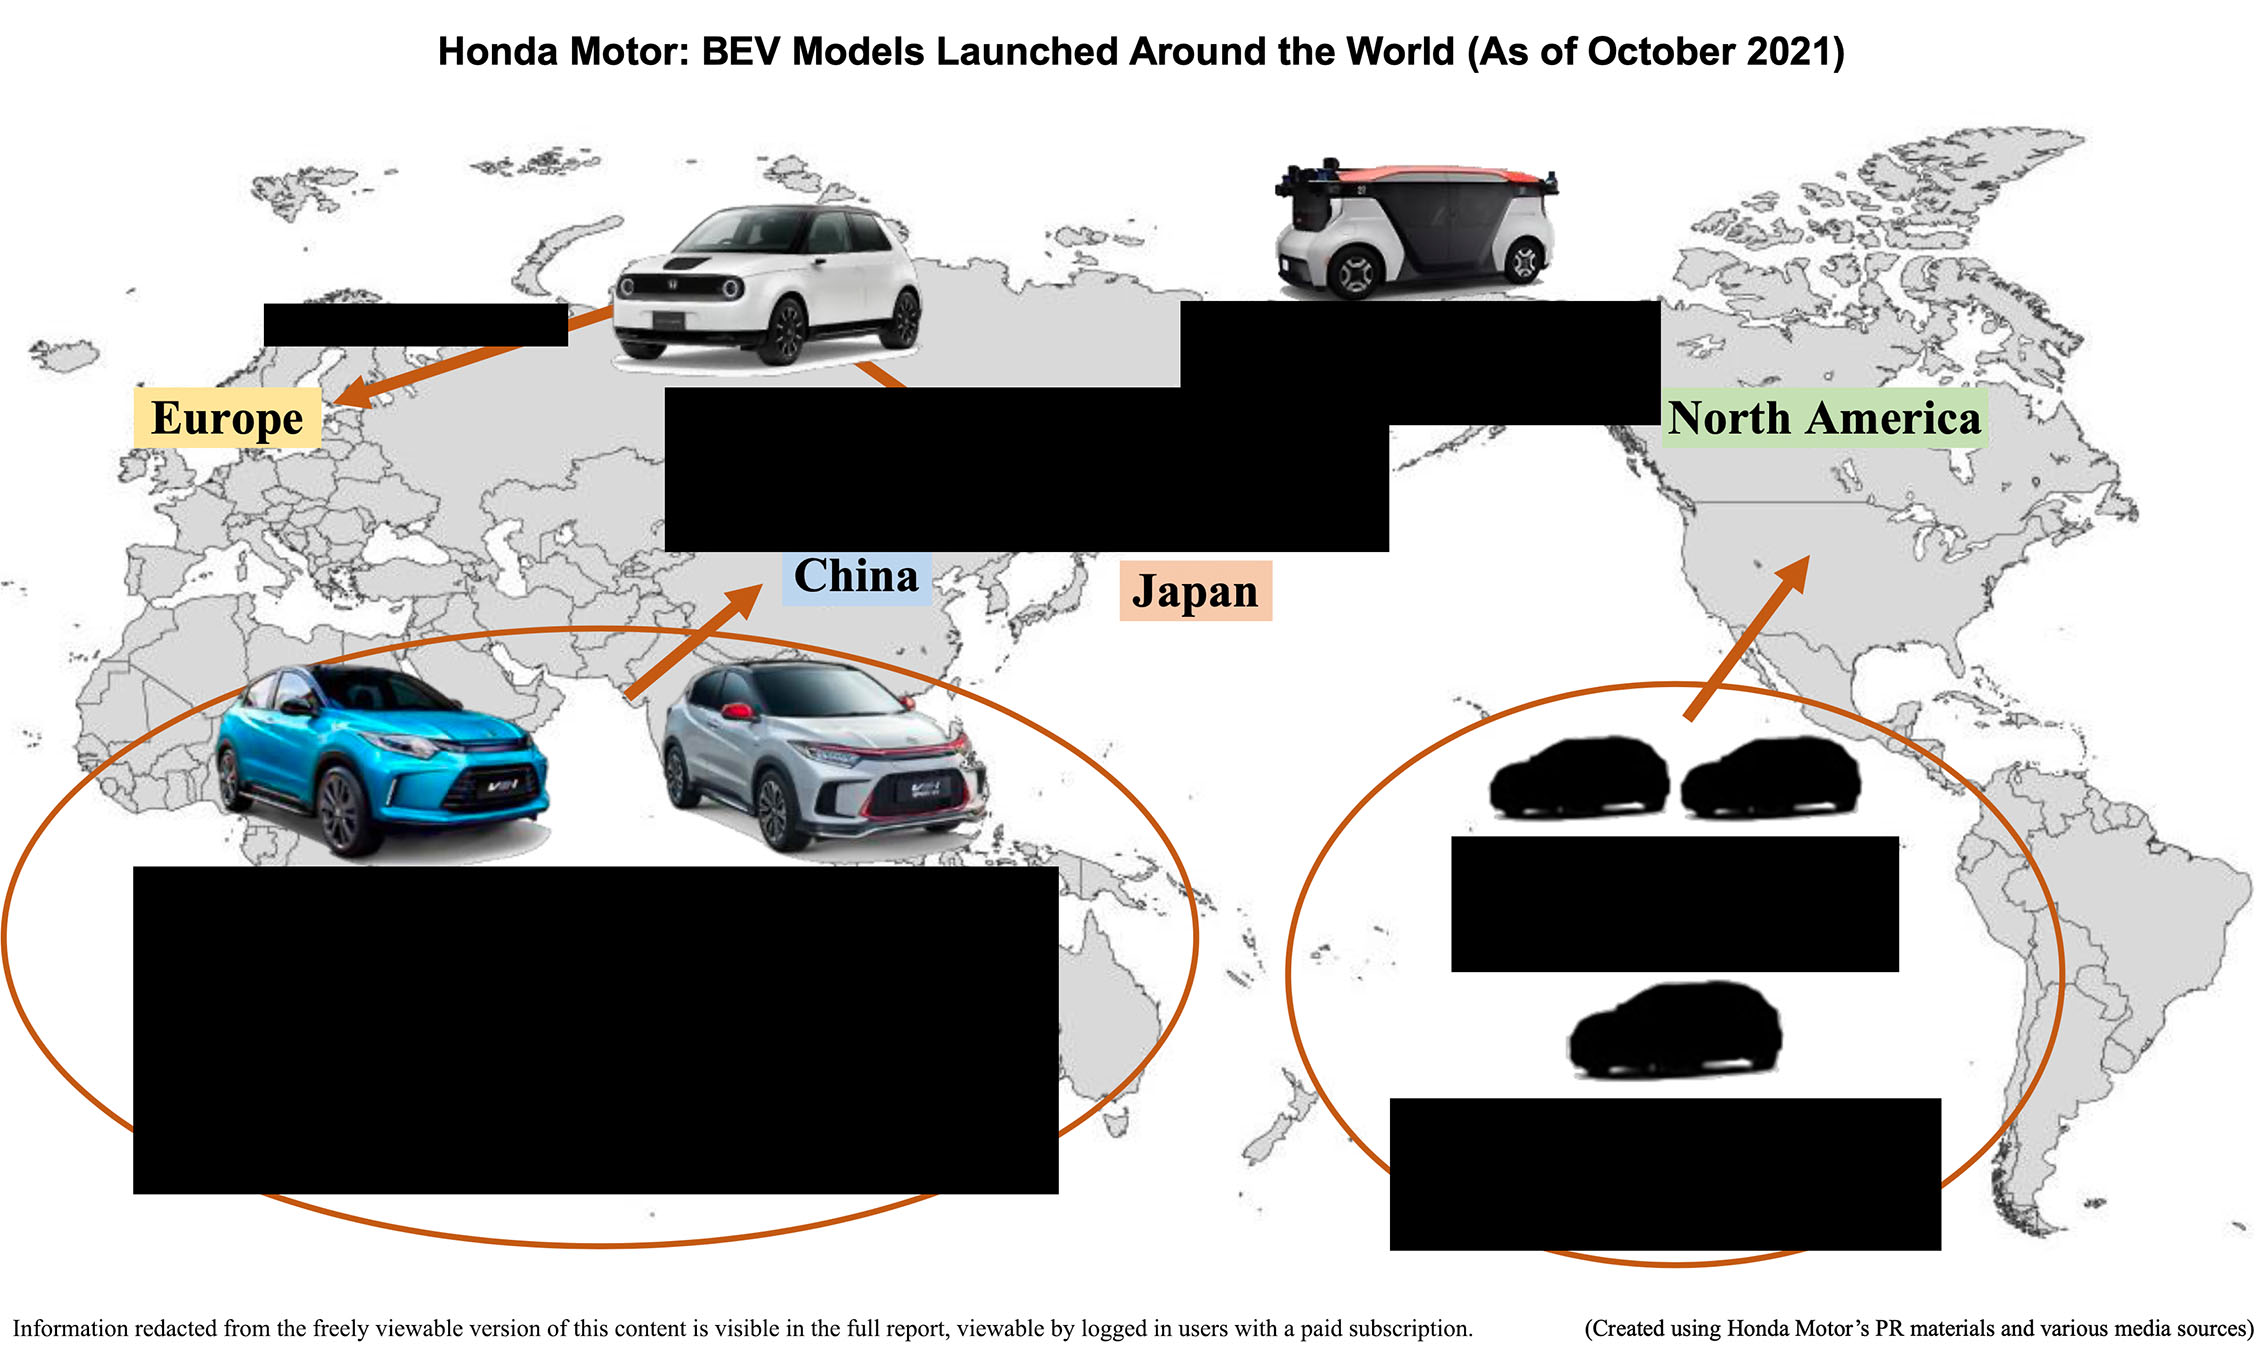 Honda Motor: BEV Models Launched Around the World (As of October 2021)